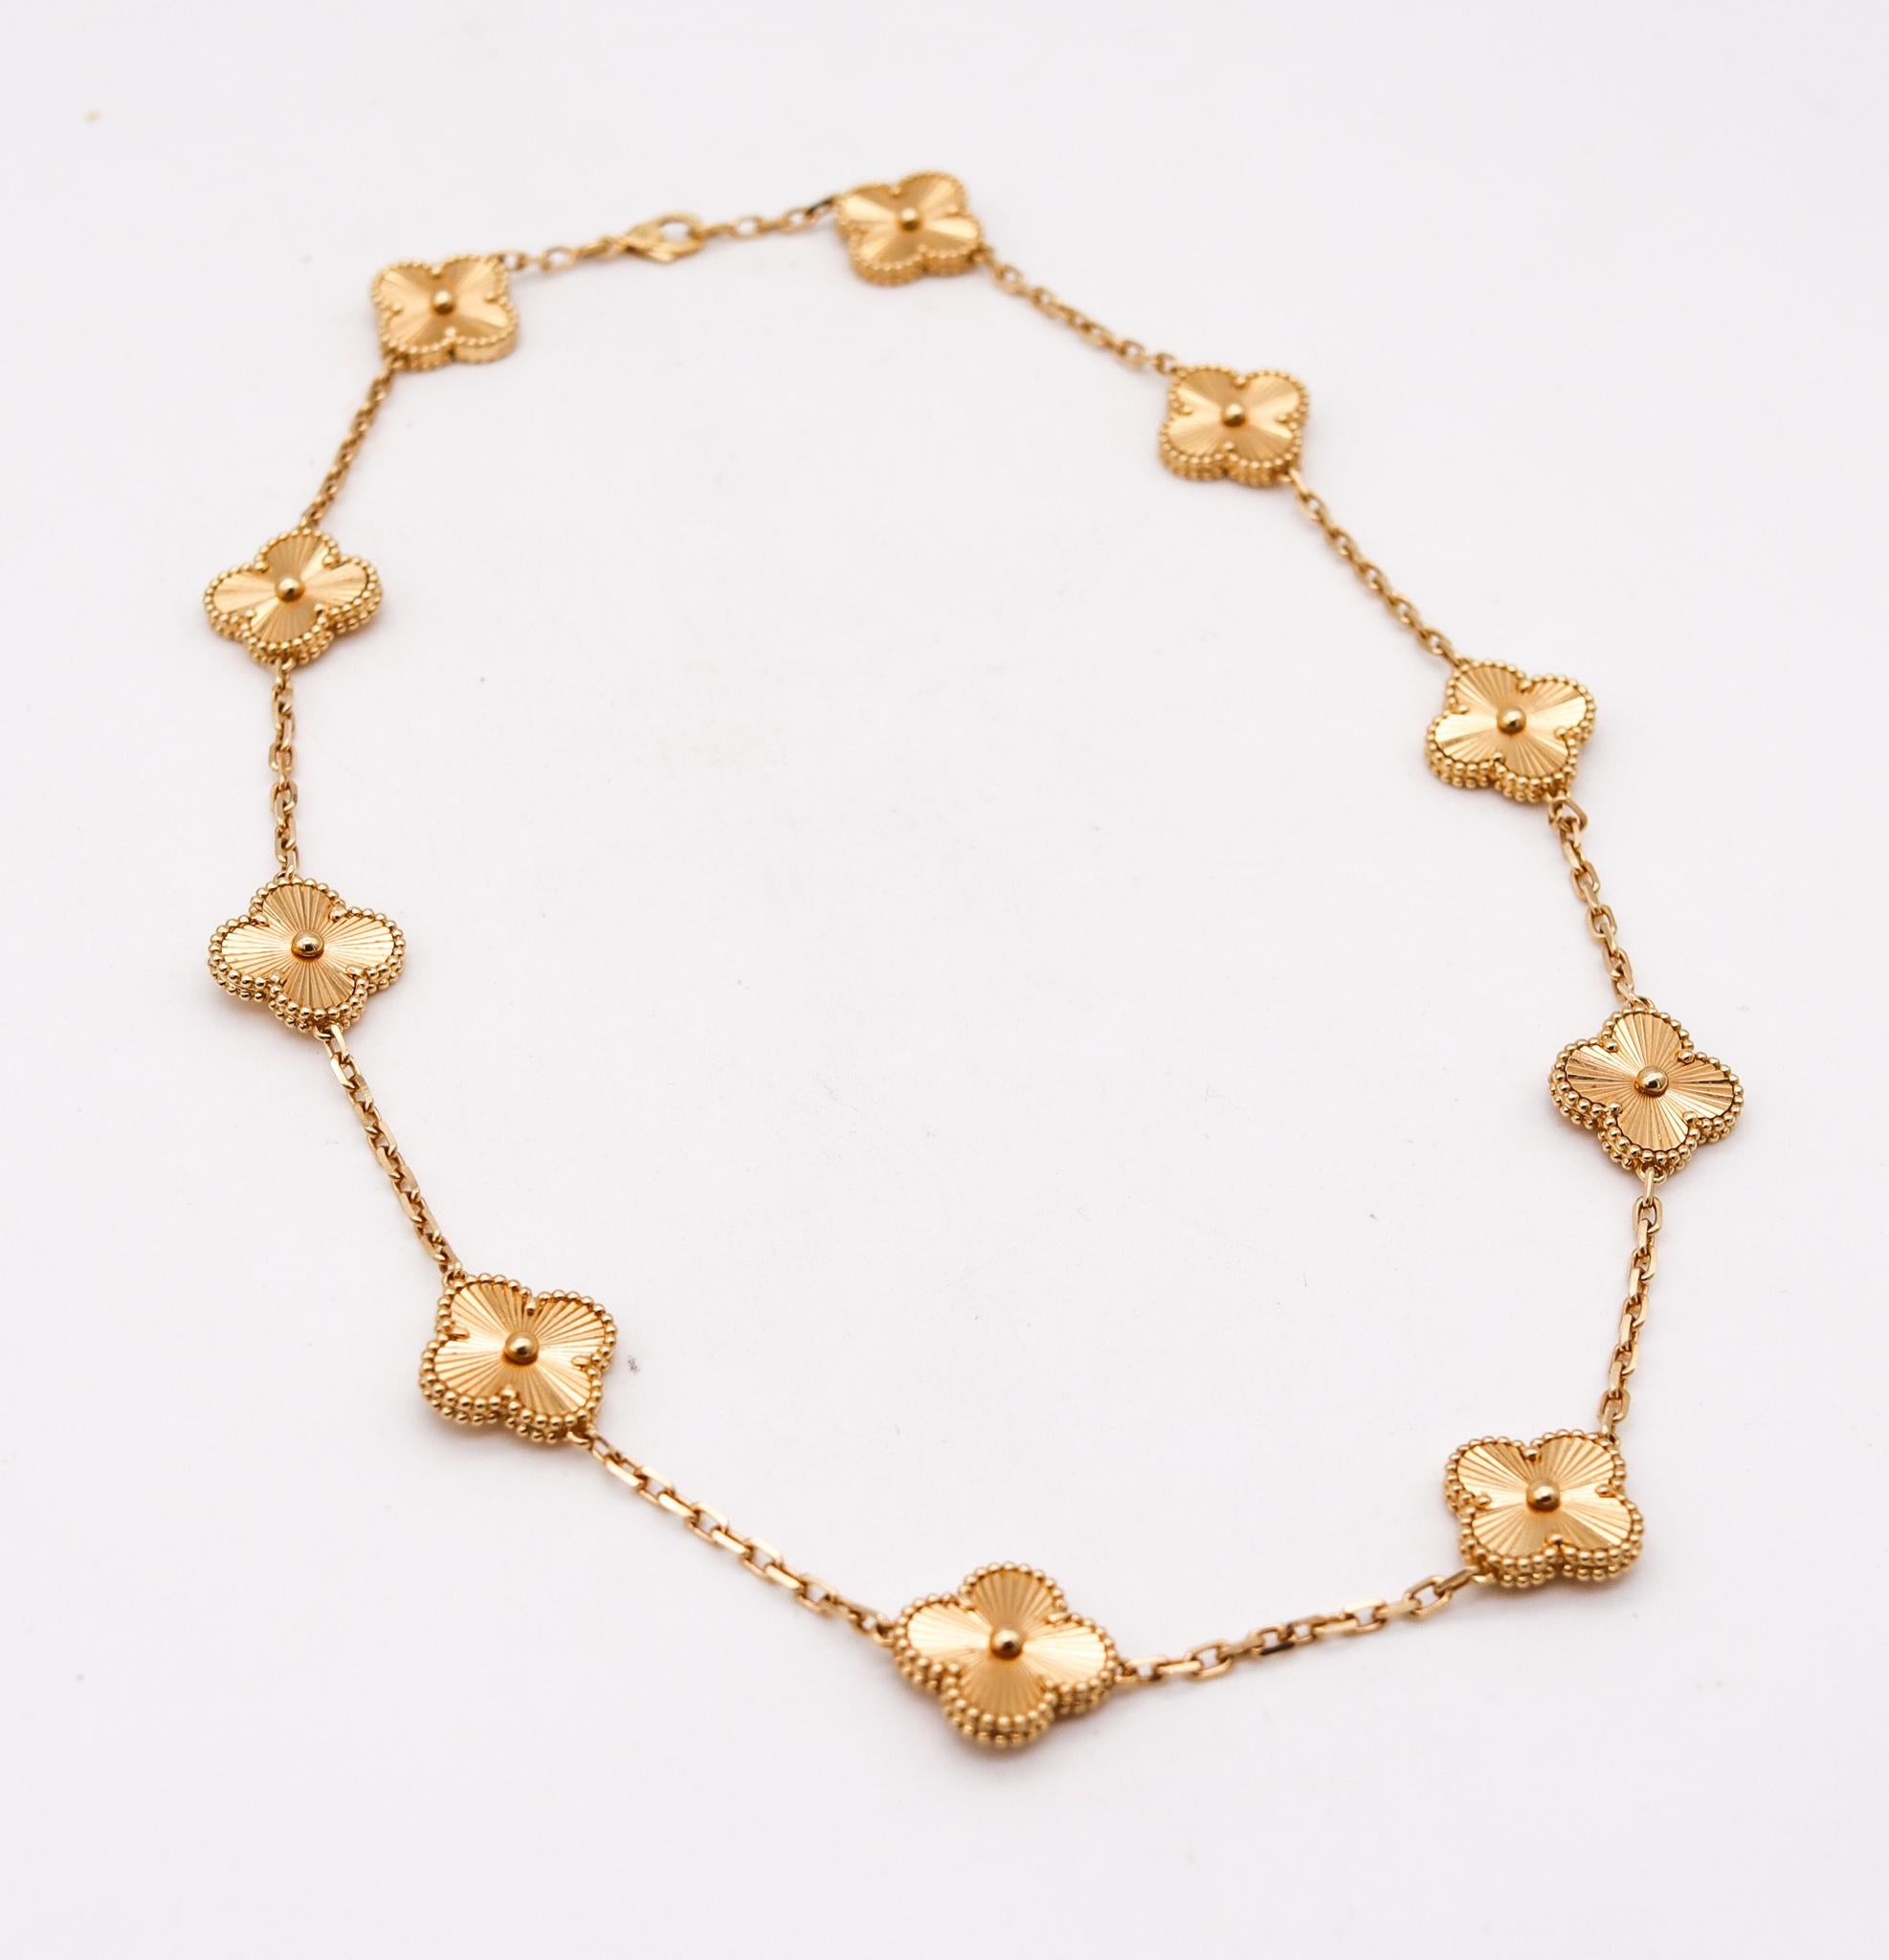 Alhambra guilloche necklace designed by Van Cleef & Arpels.

This is one of the most iconic pieces designed by the house of Van Cleef & Arpels. This ten motifs Alhambra Guilloche necklace has been crafted in solid yellow gold of 18 karats and fitted